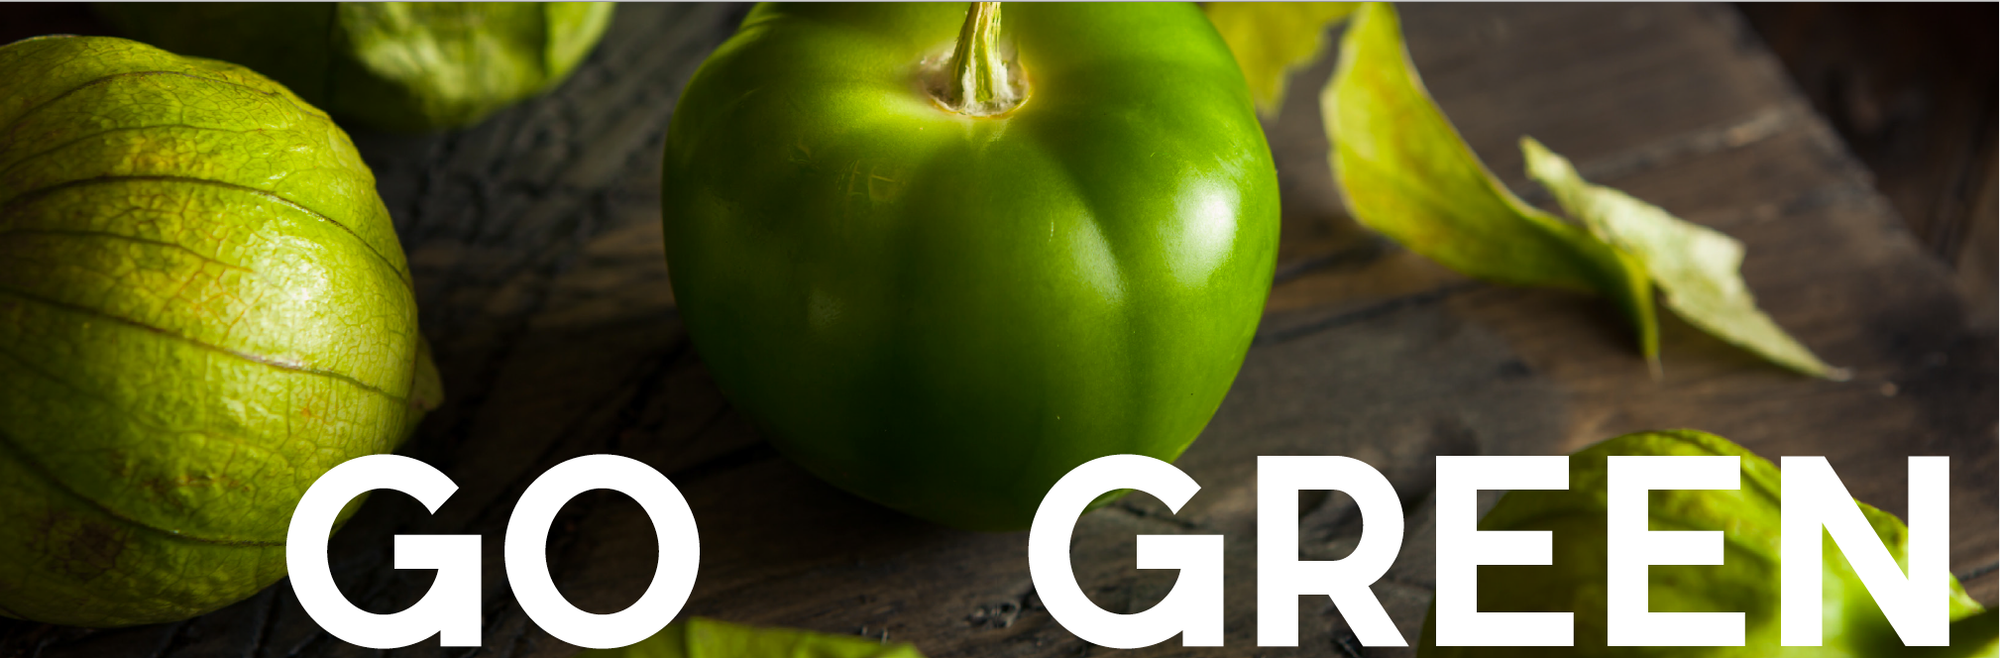 1 green bell pepper and 2 tomatillos on both sides with a text in the middle image that says, "Go Green".